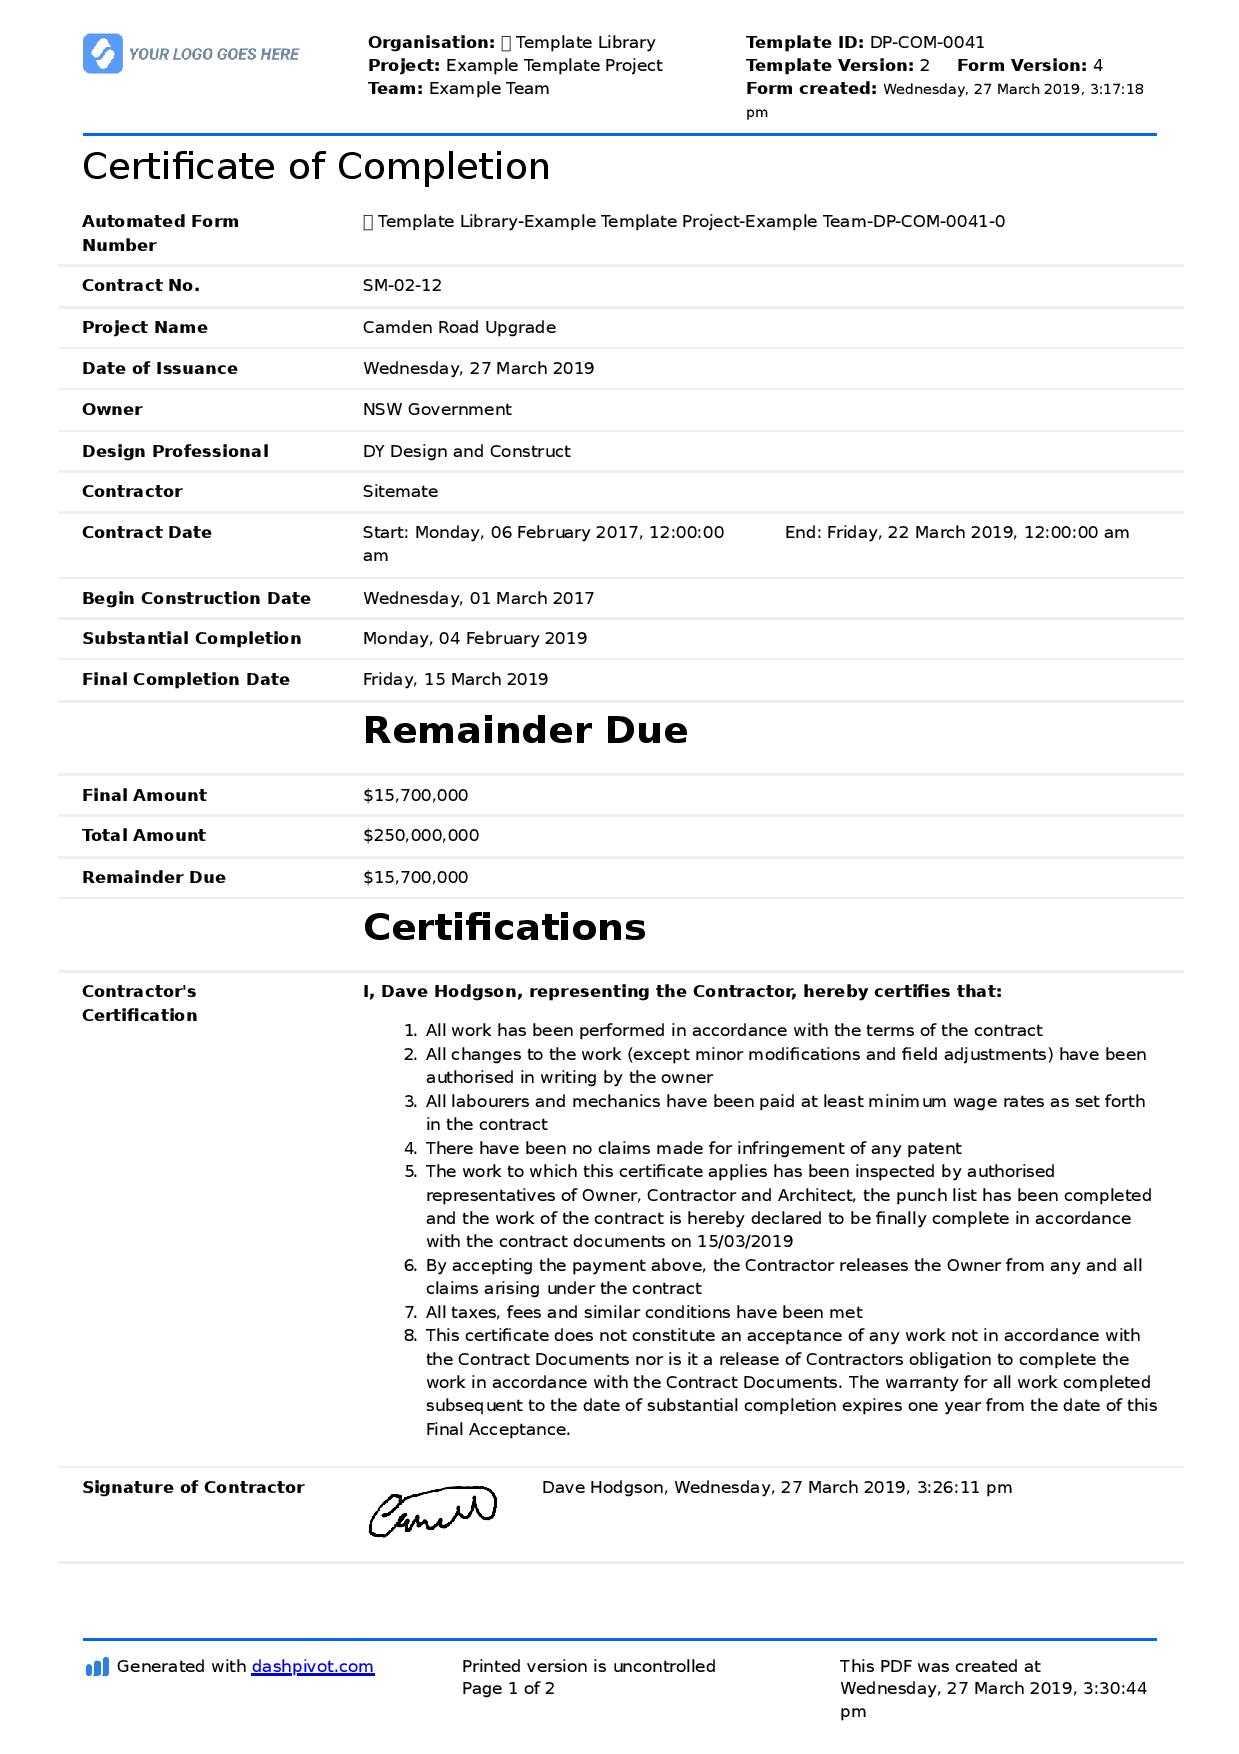 Certificate Of Completion For Construction (Free Template + Throughout Construction Certificate Of Completion Template